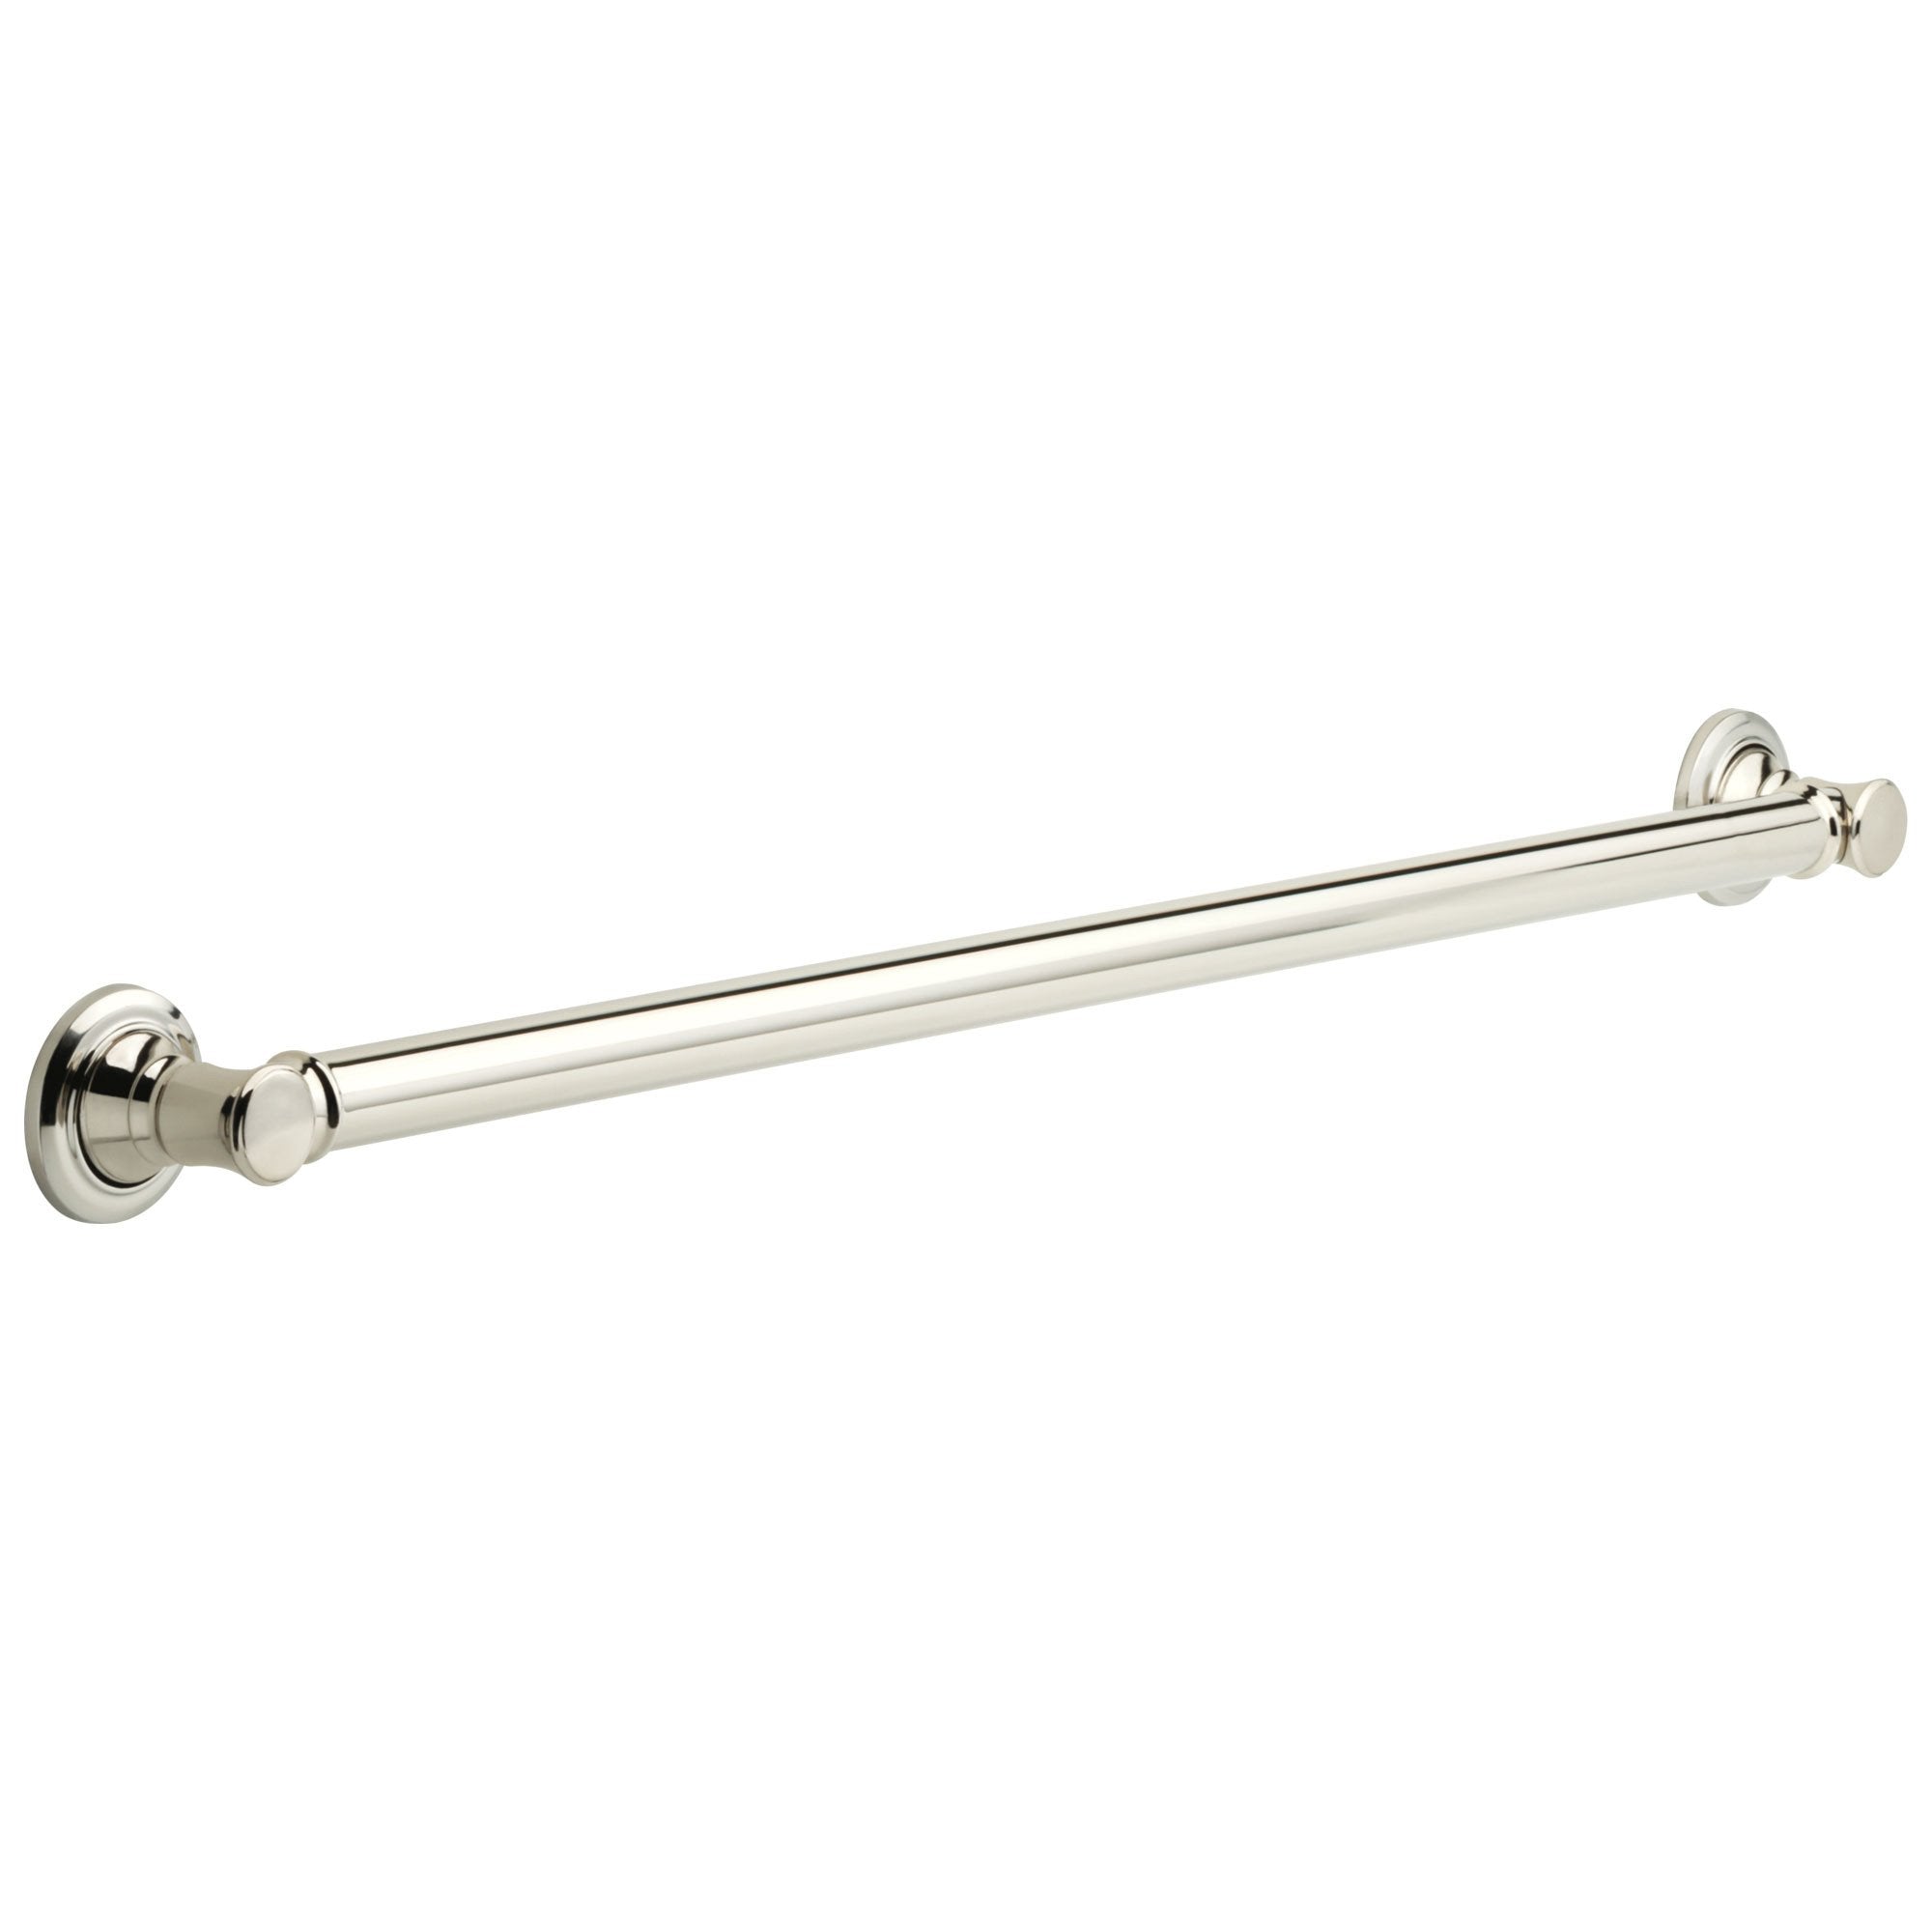 Delta Bath Safety Collection Polished Nickel Finish Traditional Style Decorative ADA Grab Bar for Shower or Bathroom - 36-inch D41636PN